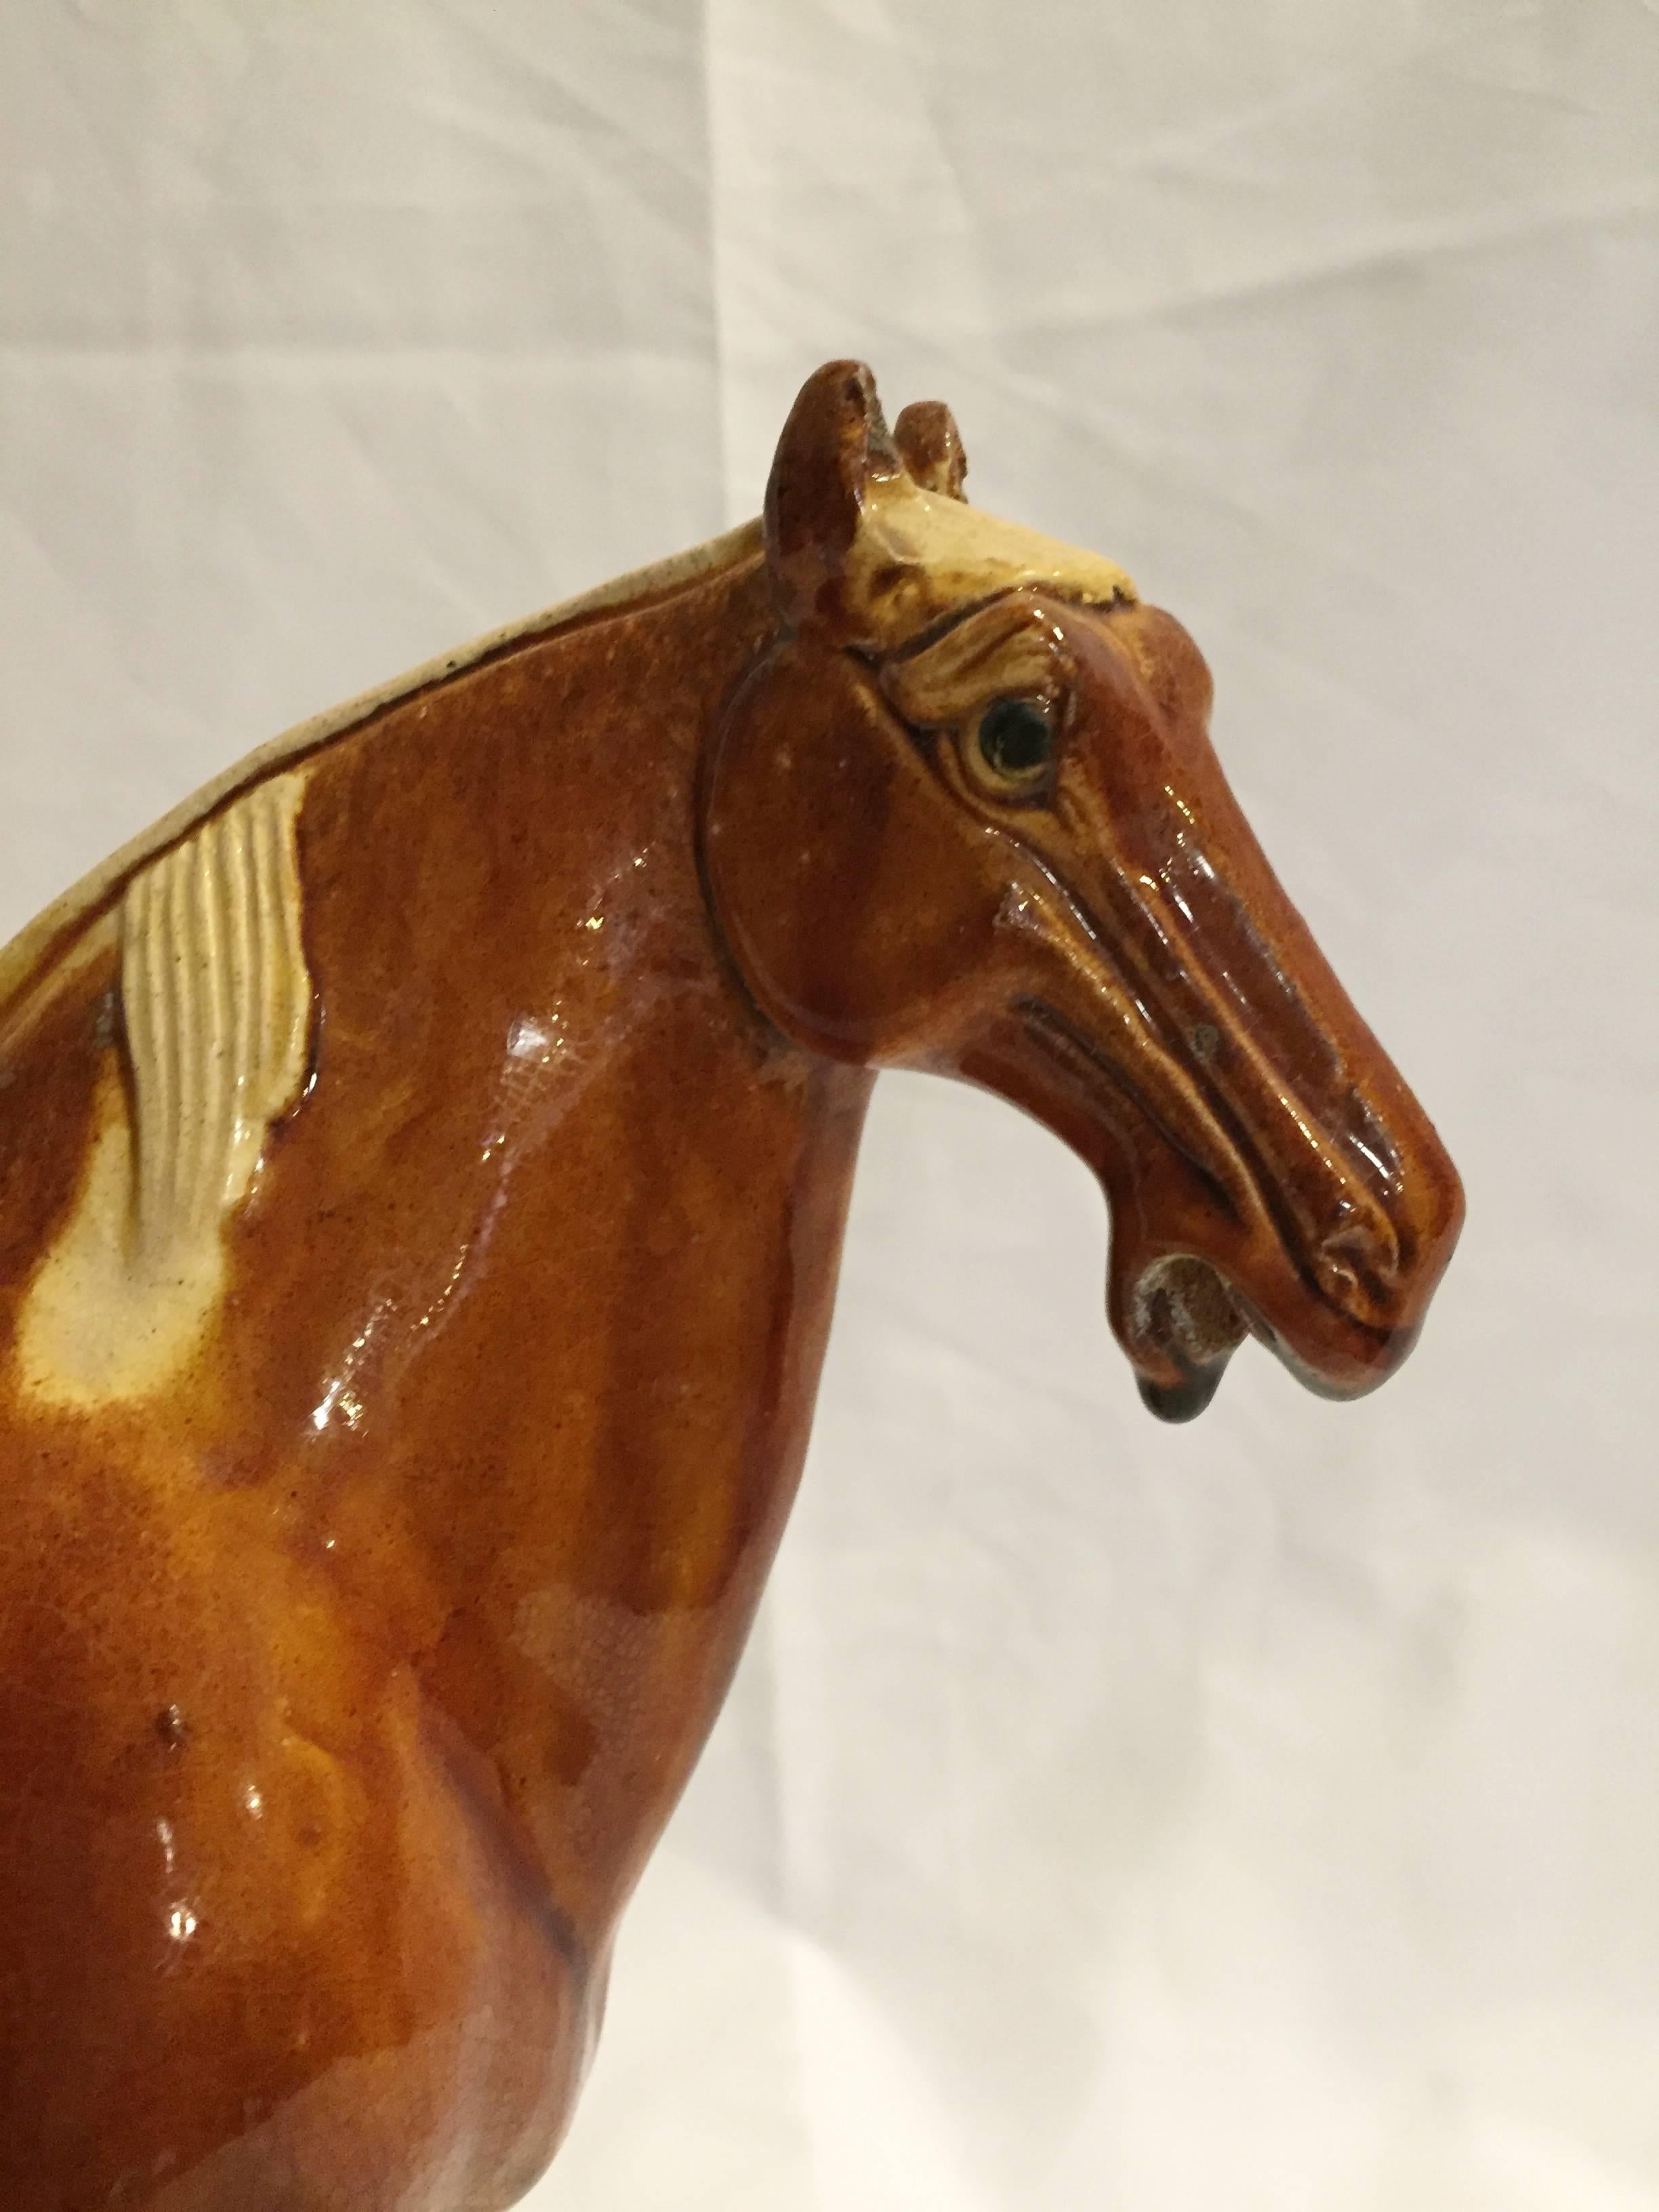 This pair of beautiful terracotta horses are handmade and painted using the ancient Tri-Glaze techniques. A true work of art, the splendid glossy glaze is distinctive of Tang San Cai style. Glaze is skillfully applied achieving high artistic effect.